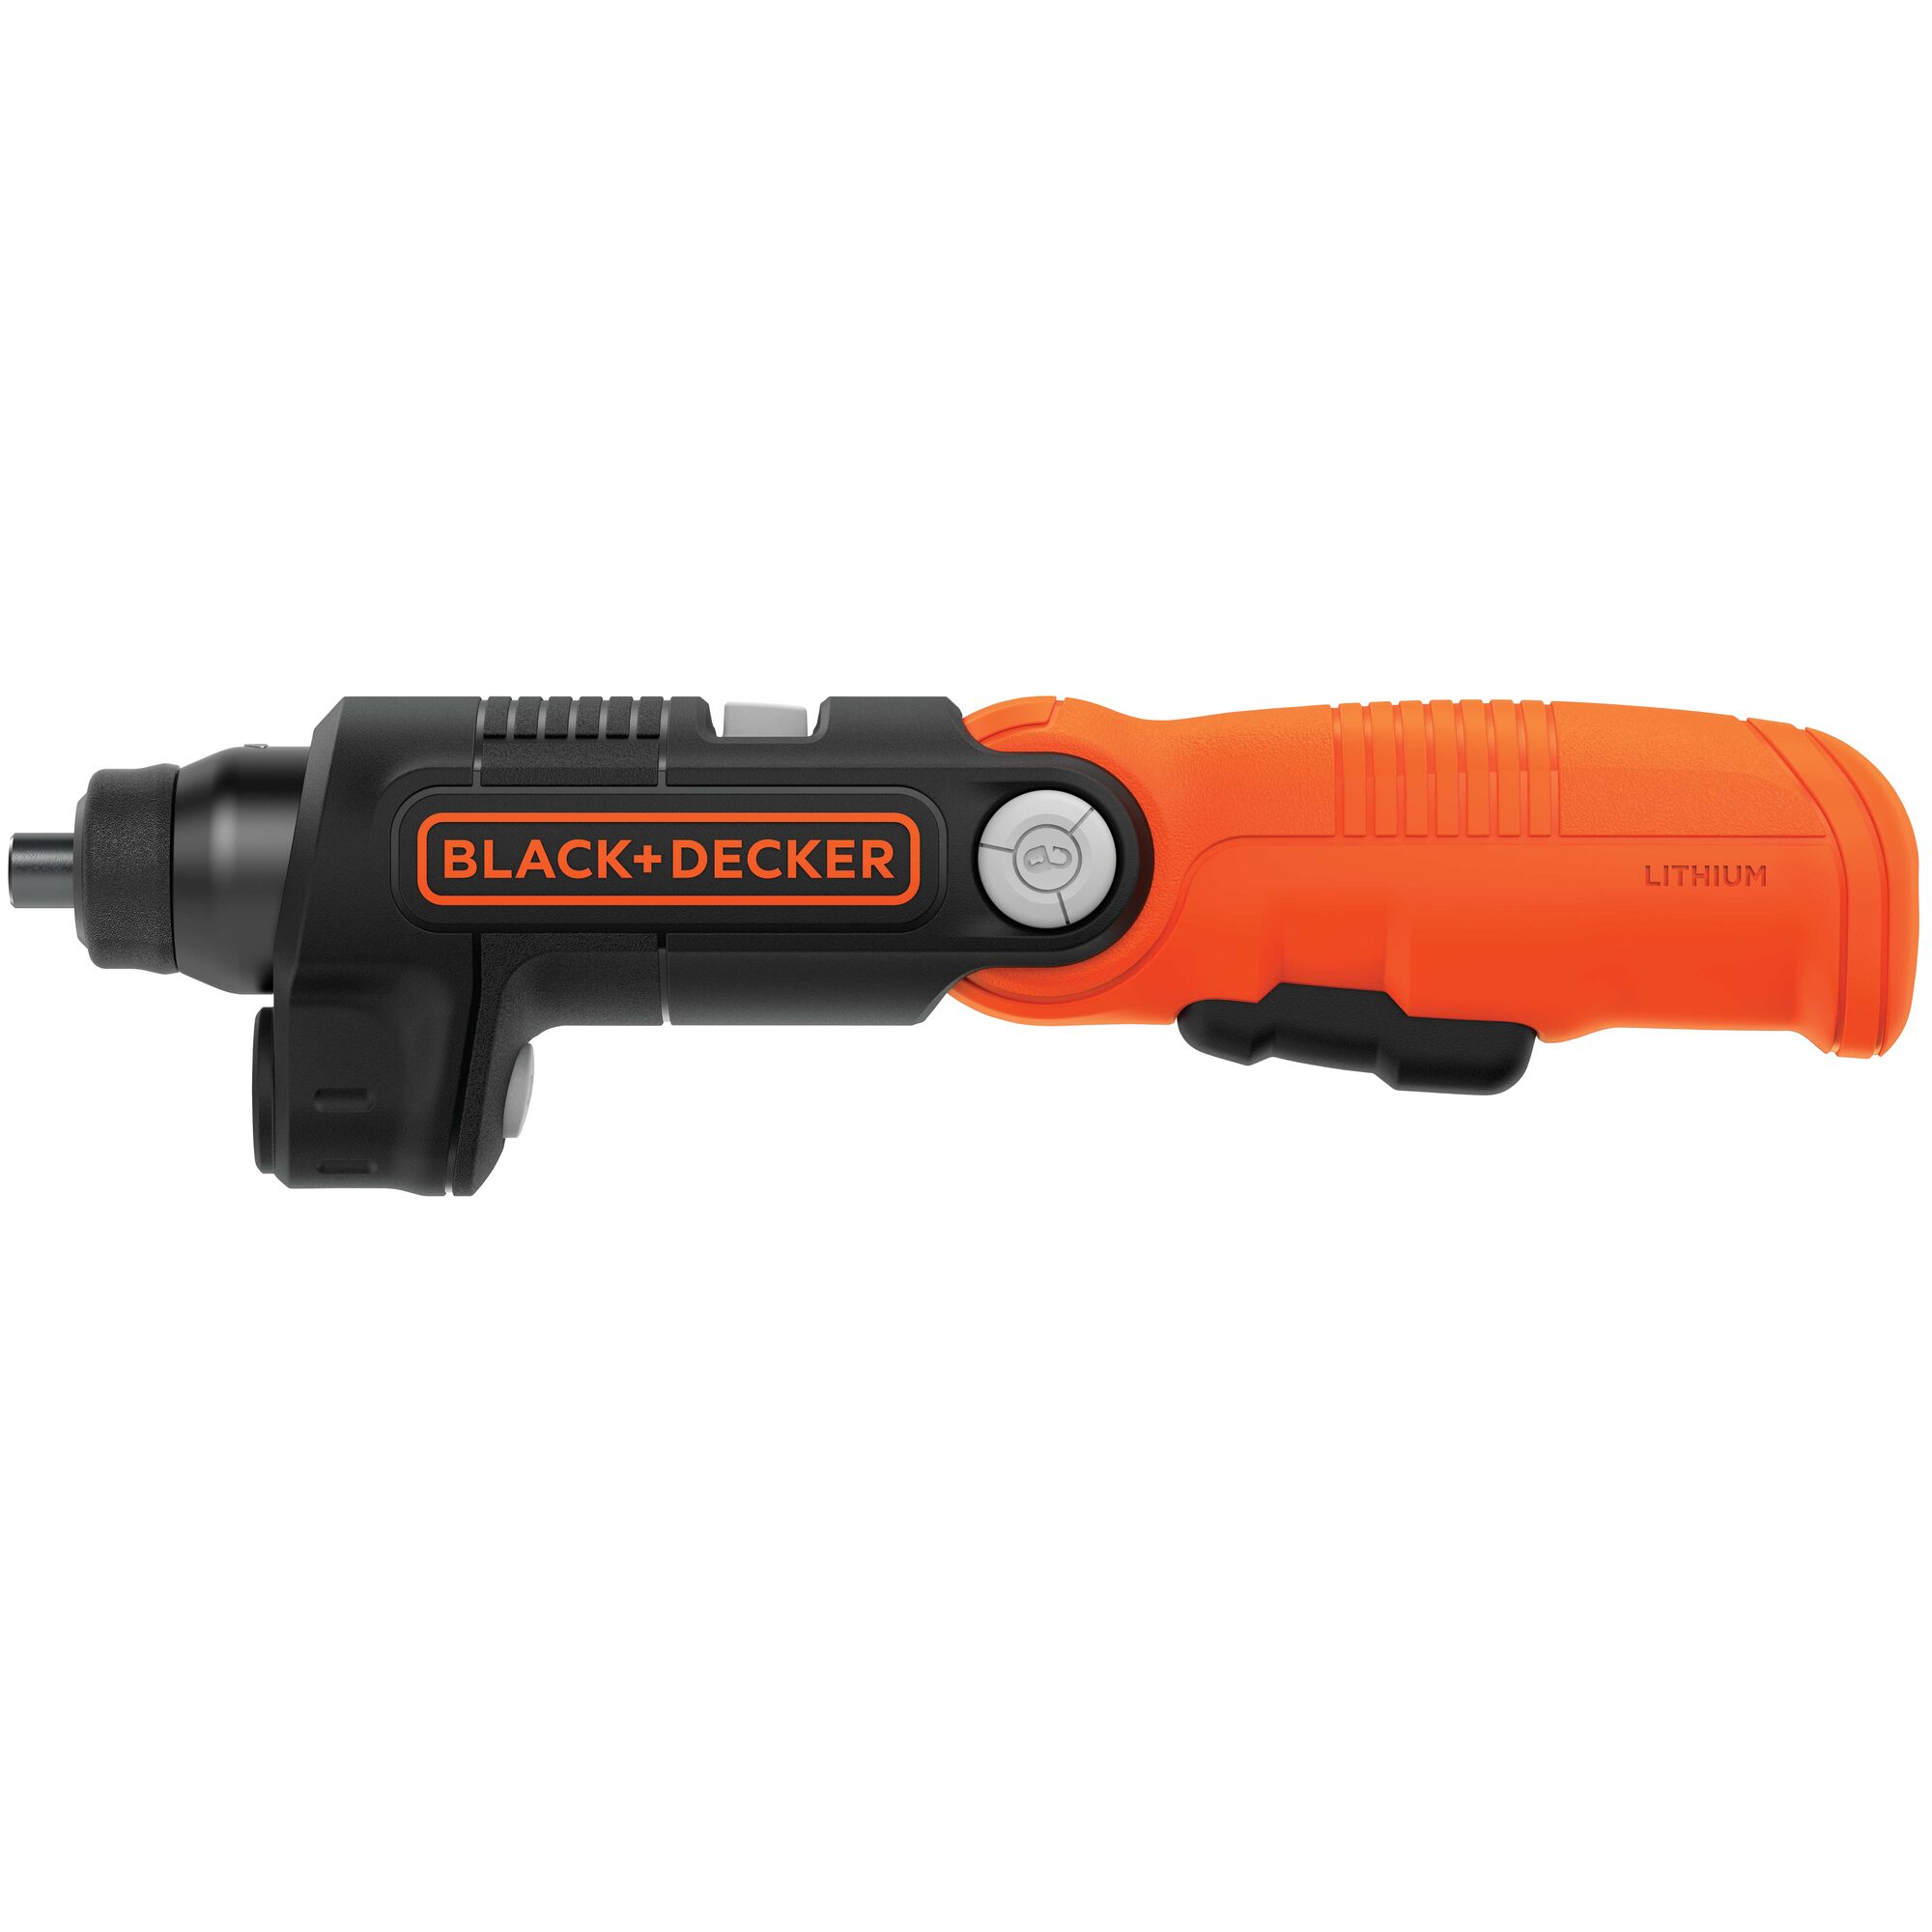 Profile of 4 volt max lithium ion lightdriver cordless screwdriver